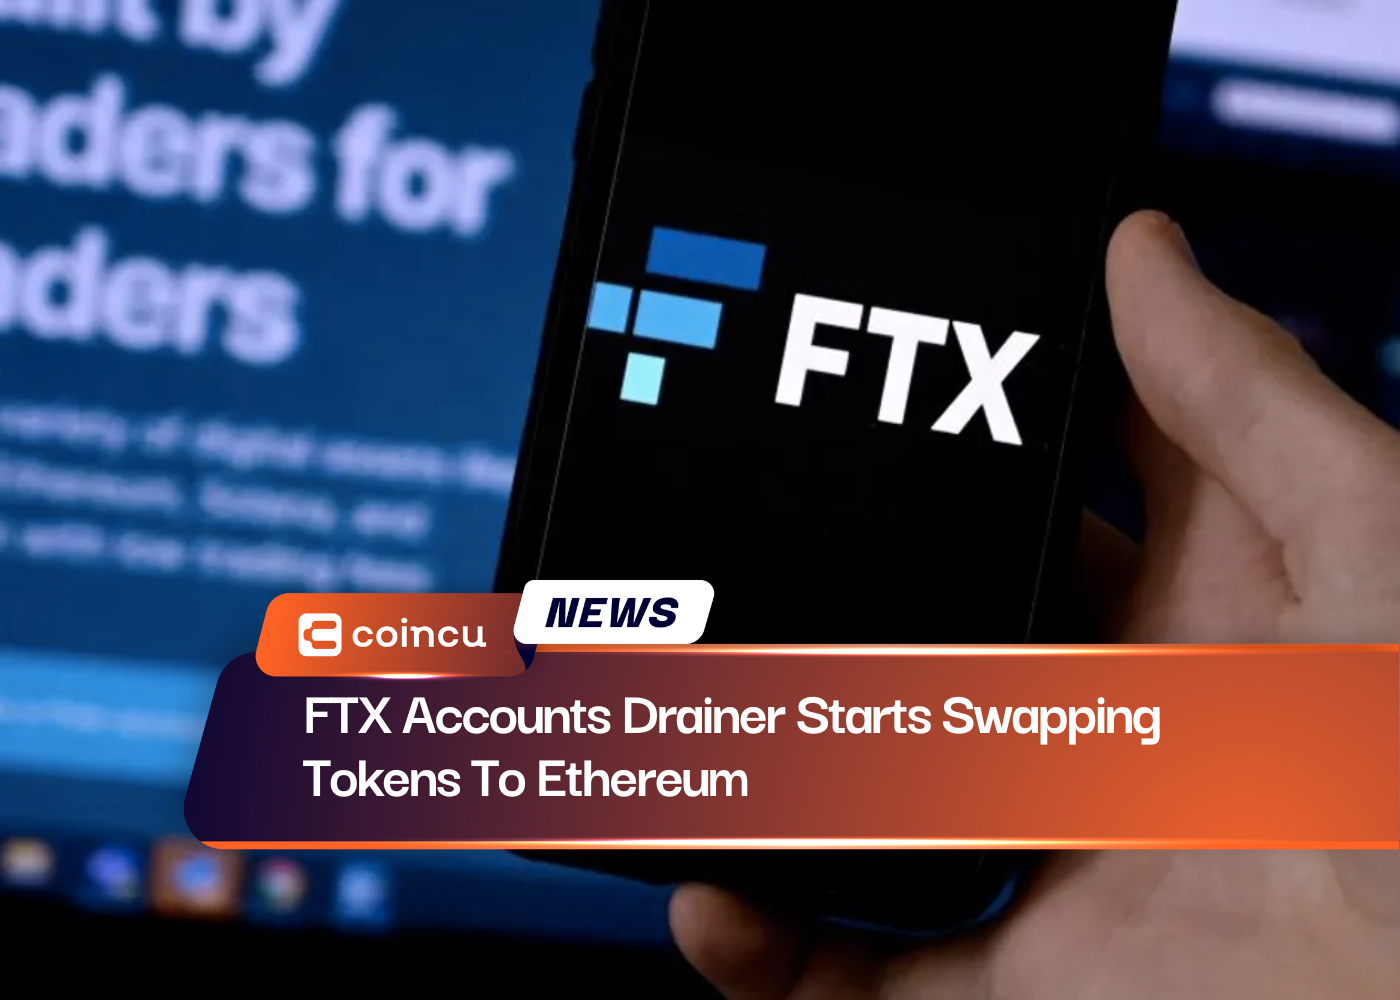 FTX Accounts Drainer Starts Swapping Tokens To Ethereum